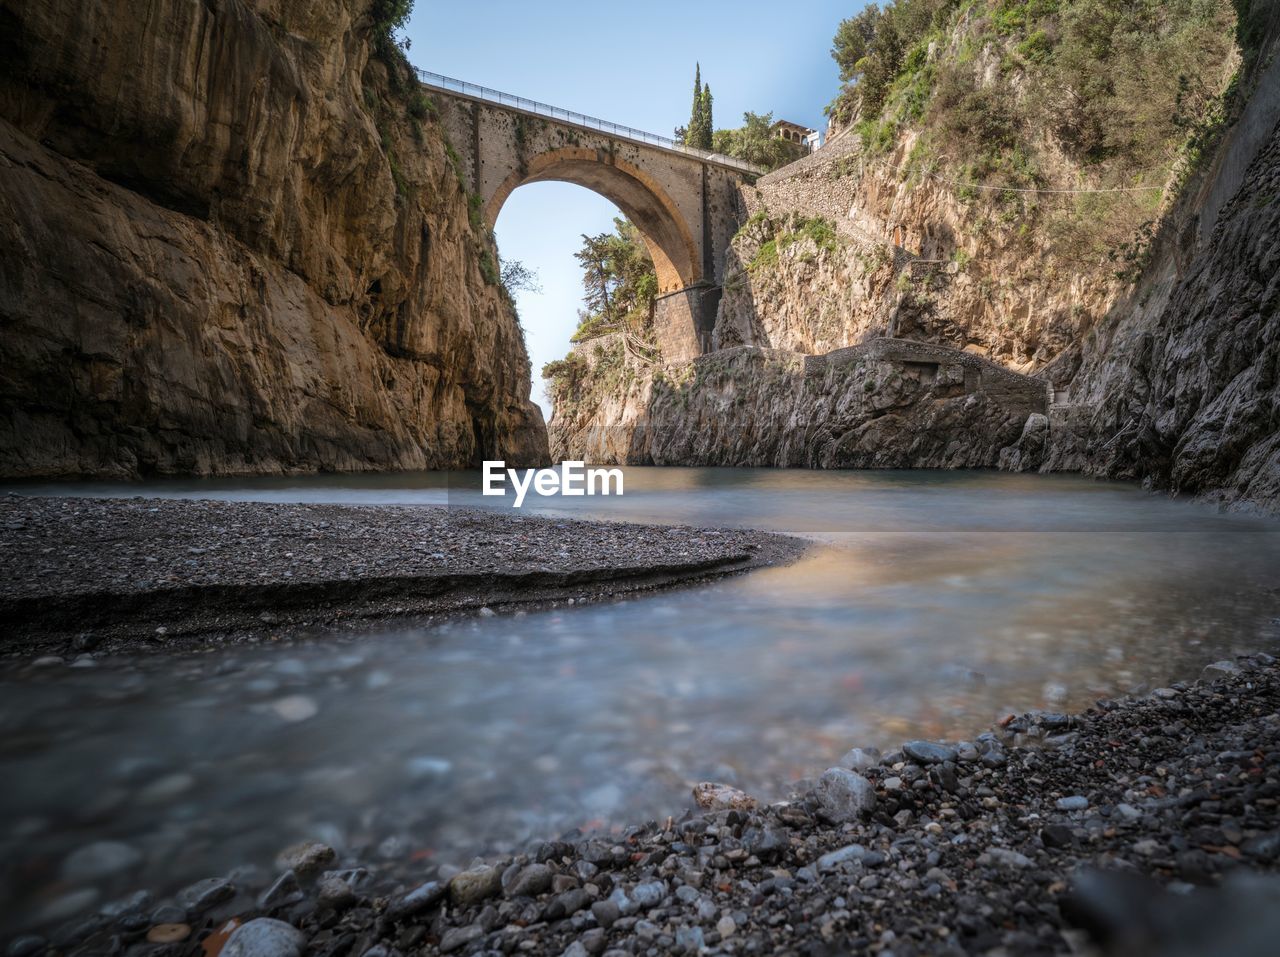 Arch bridge over river amidst rock formations